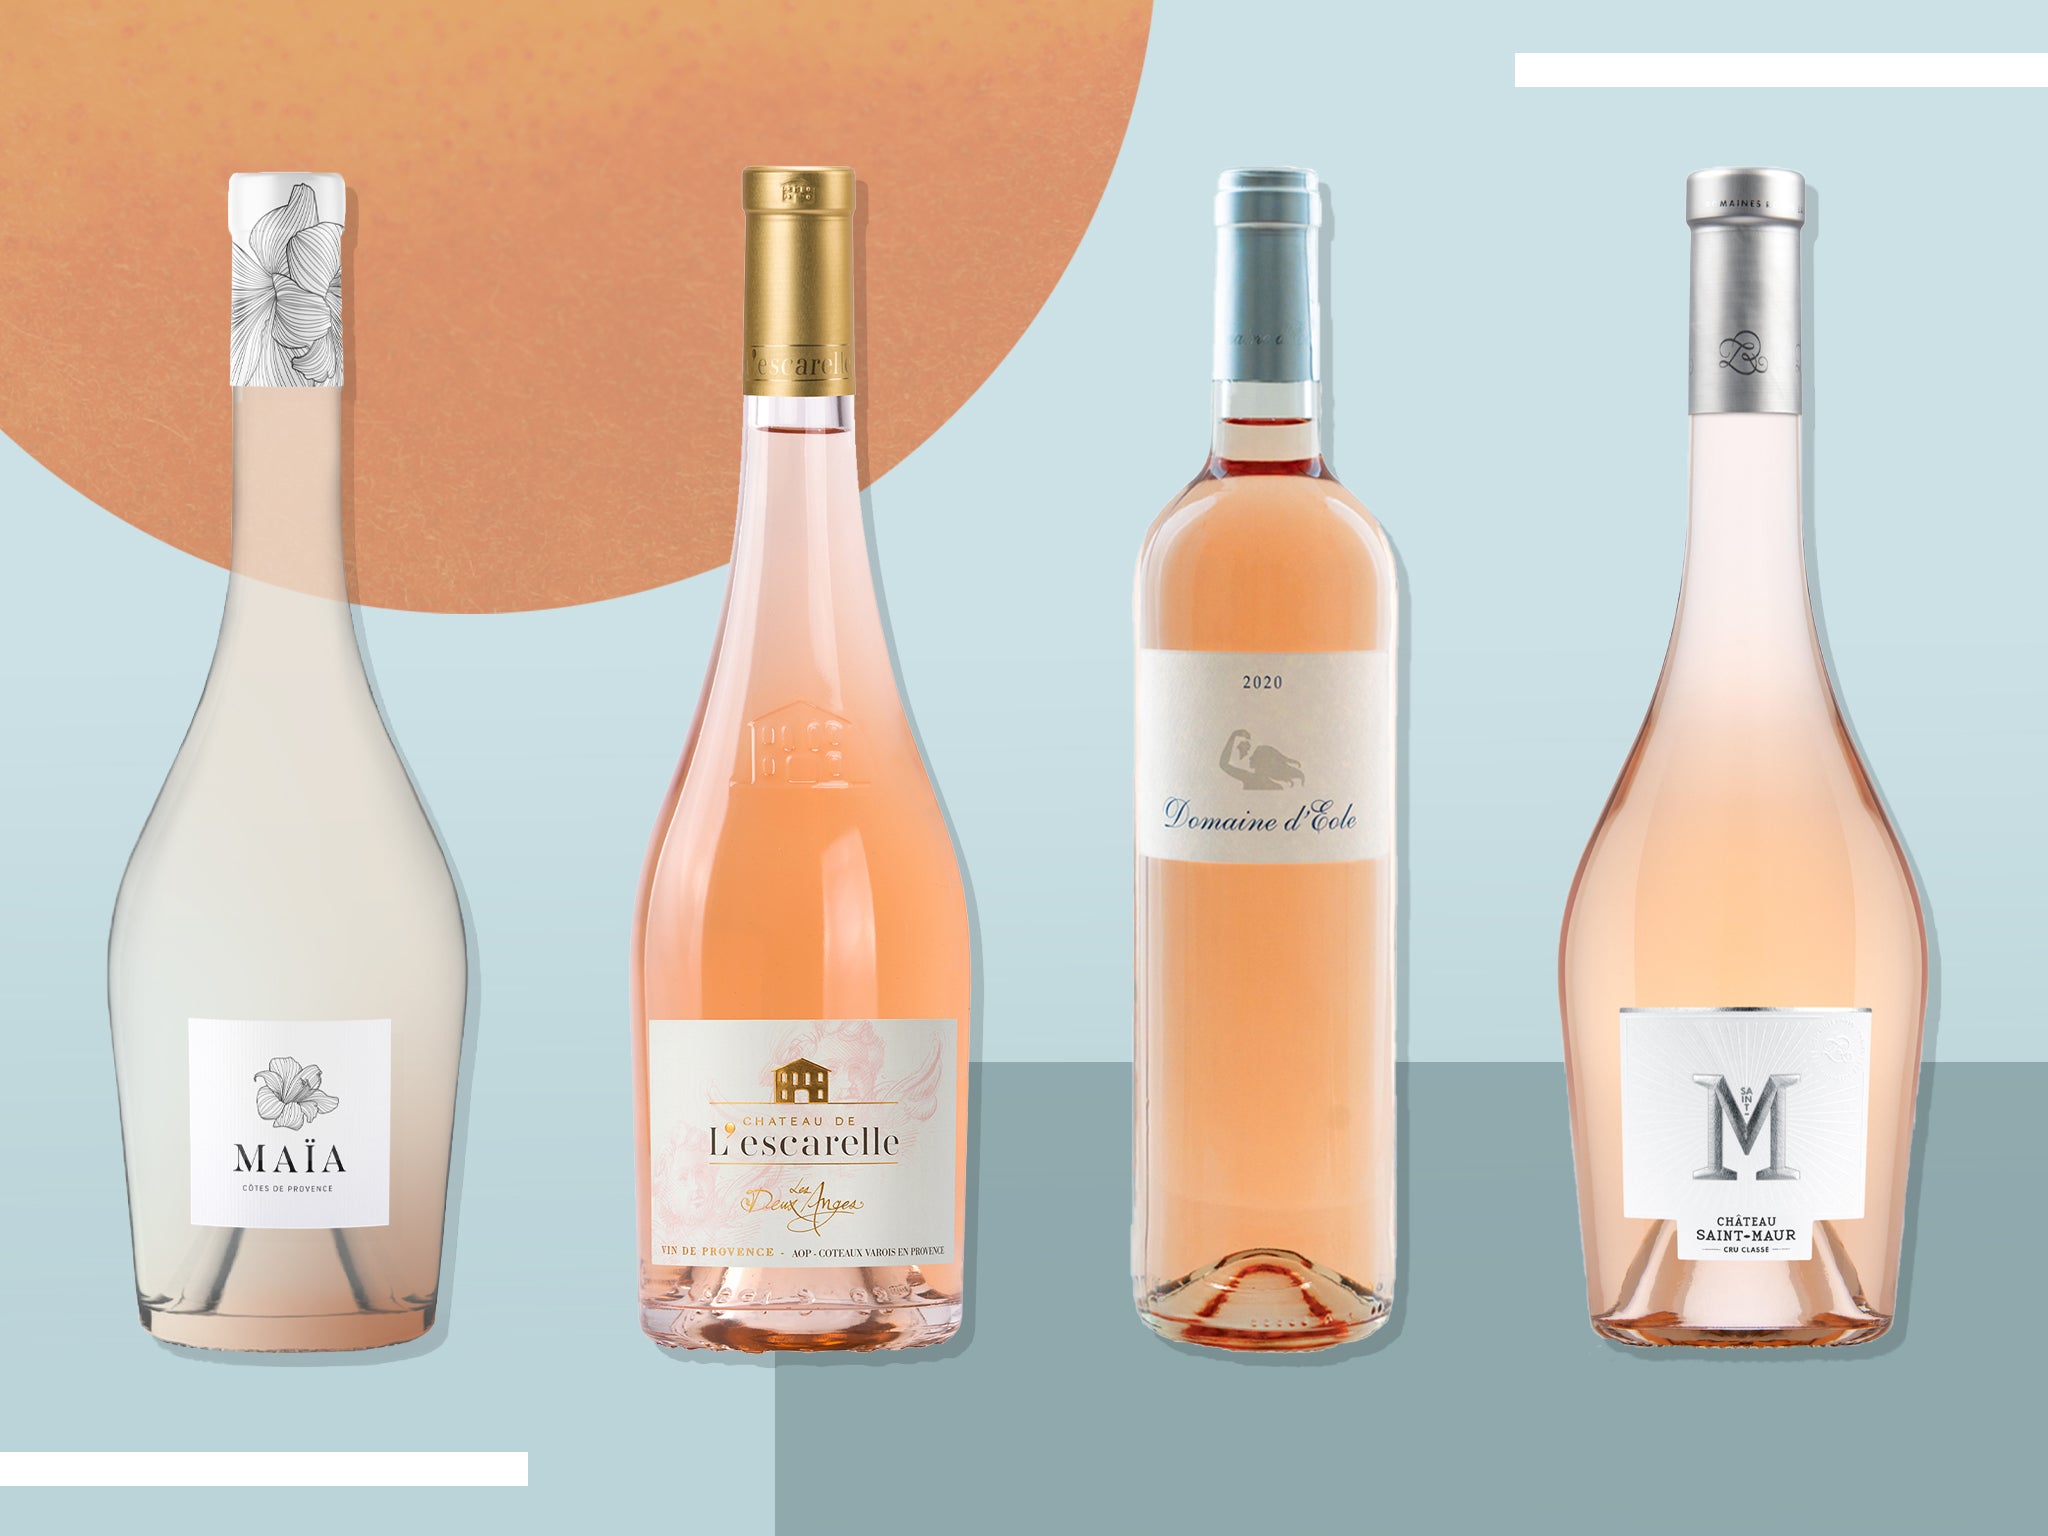 Sometimes tall and slim, but always distinctive in its very pale colour, a bottle of Provencal rosé has probably the most recognisable “look” of any wine on sale